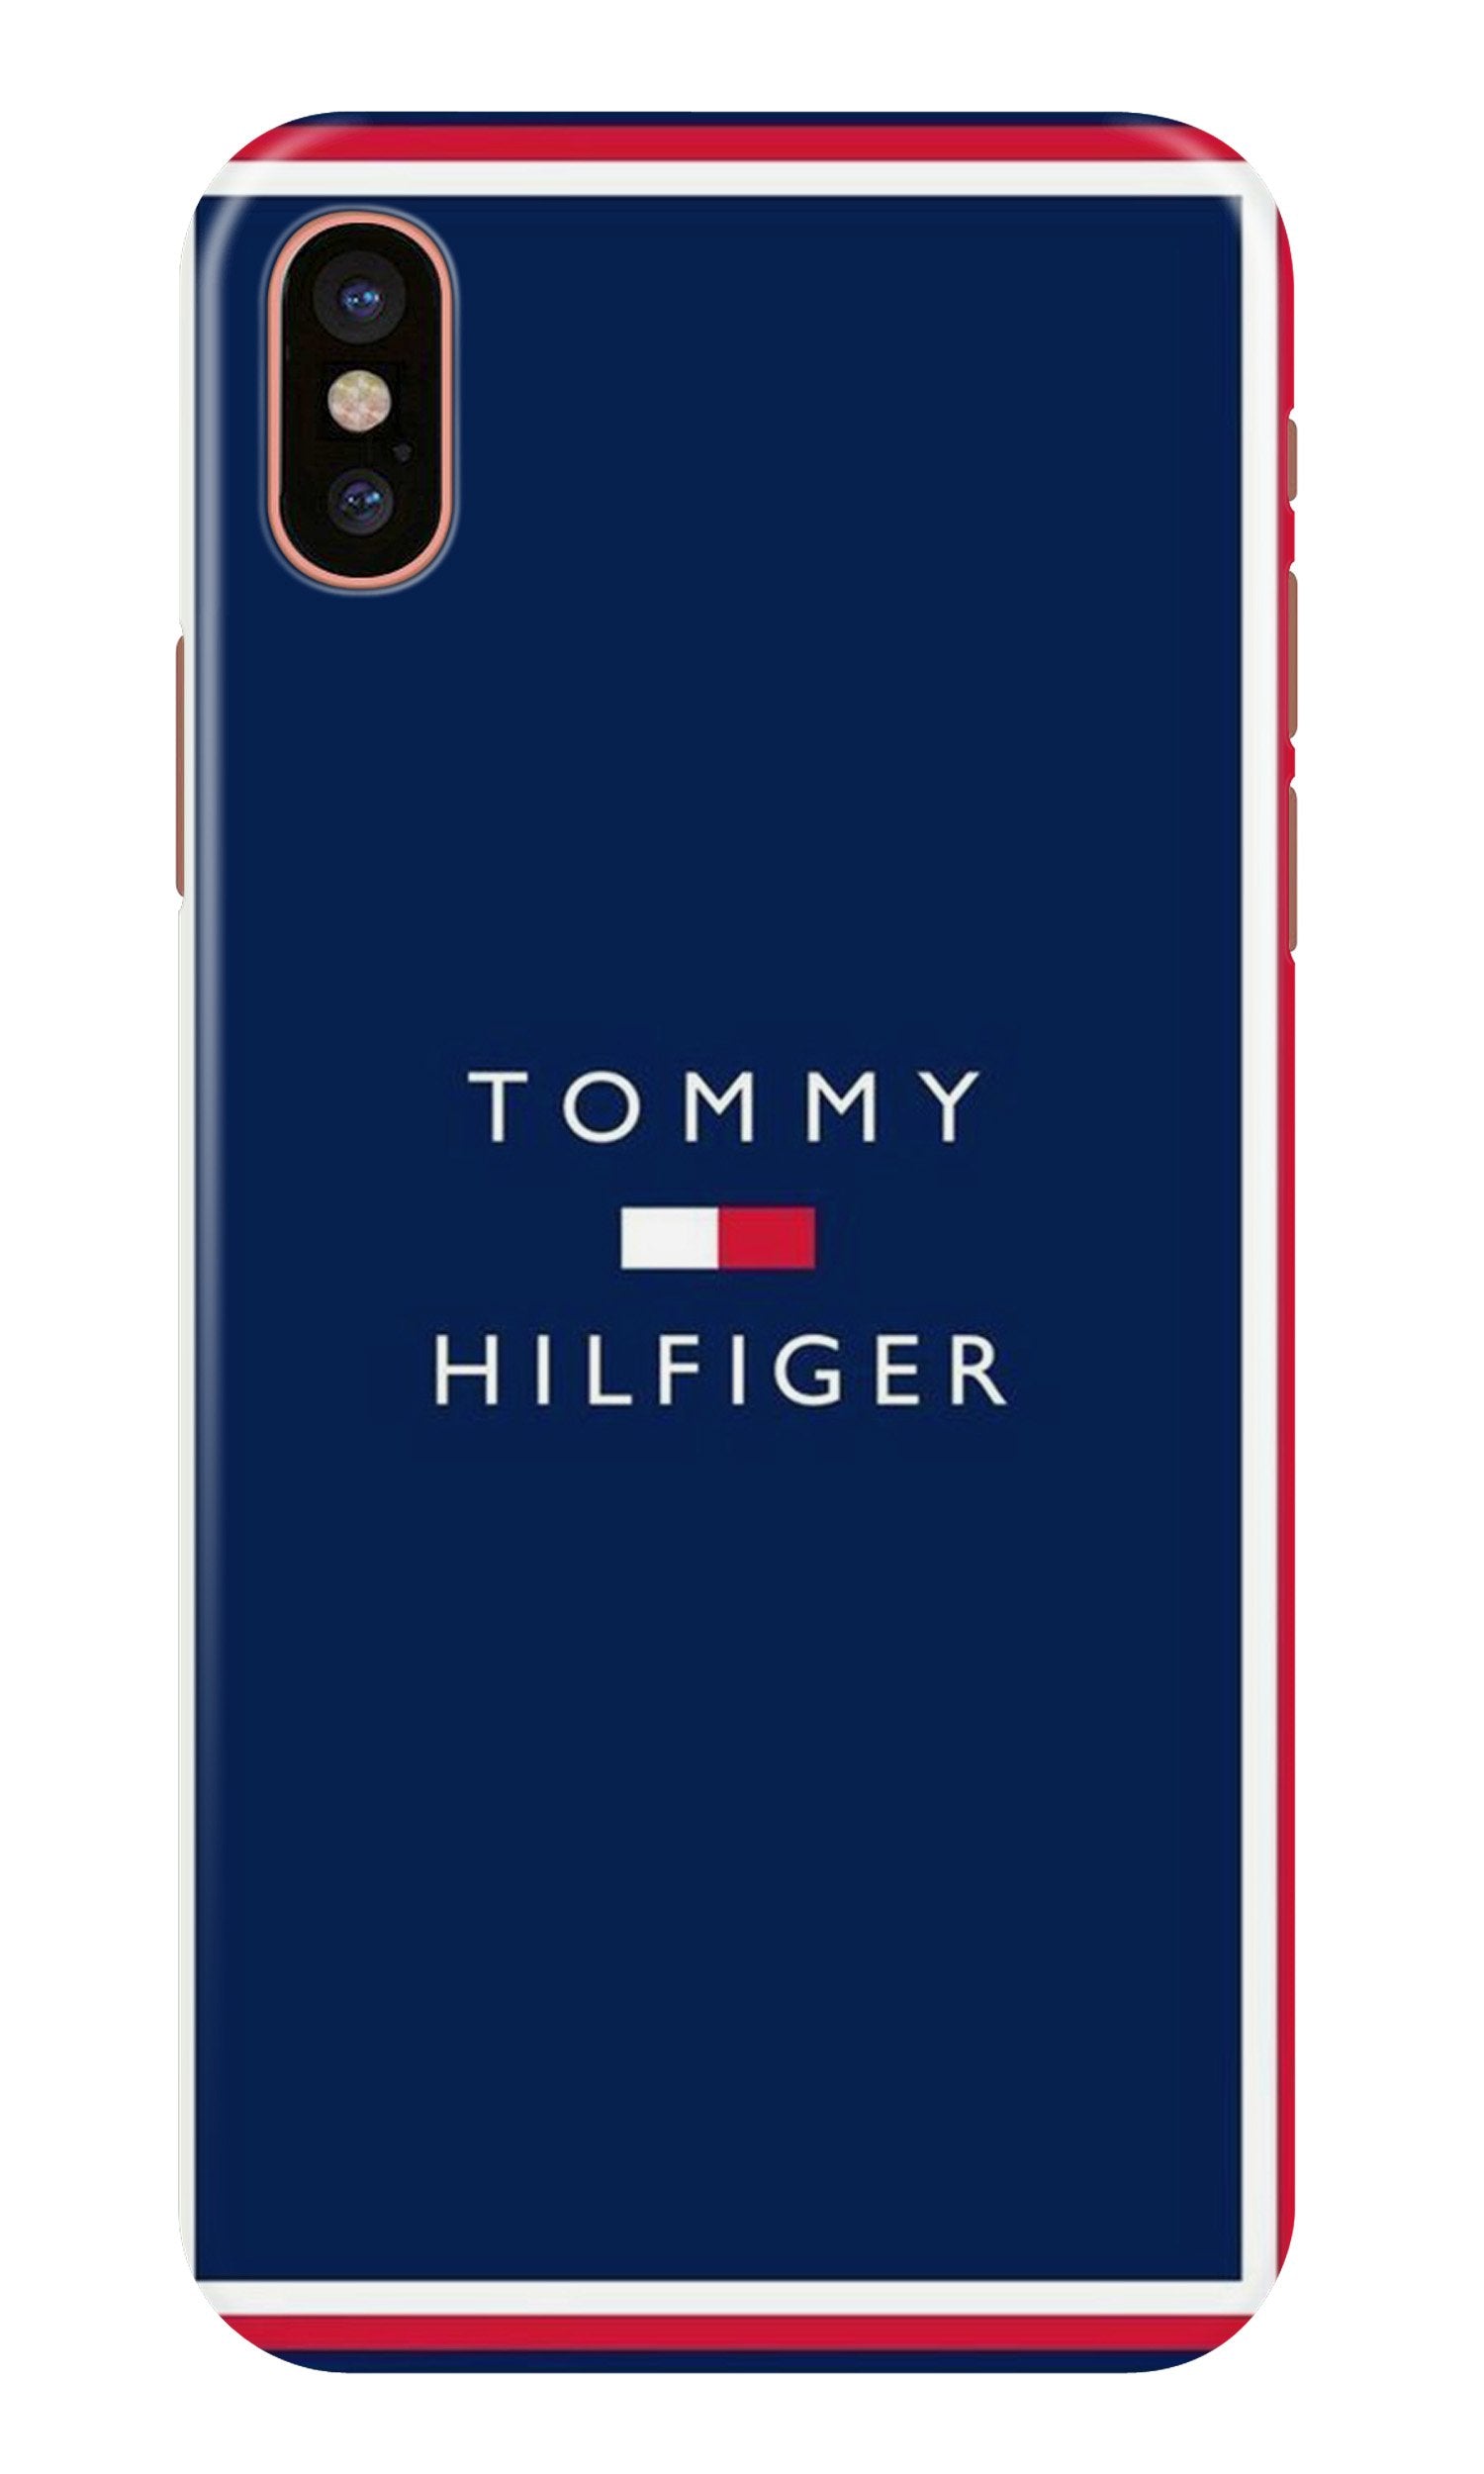 Tommy Hilfiger Case for iPhone X (Design No. 275)